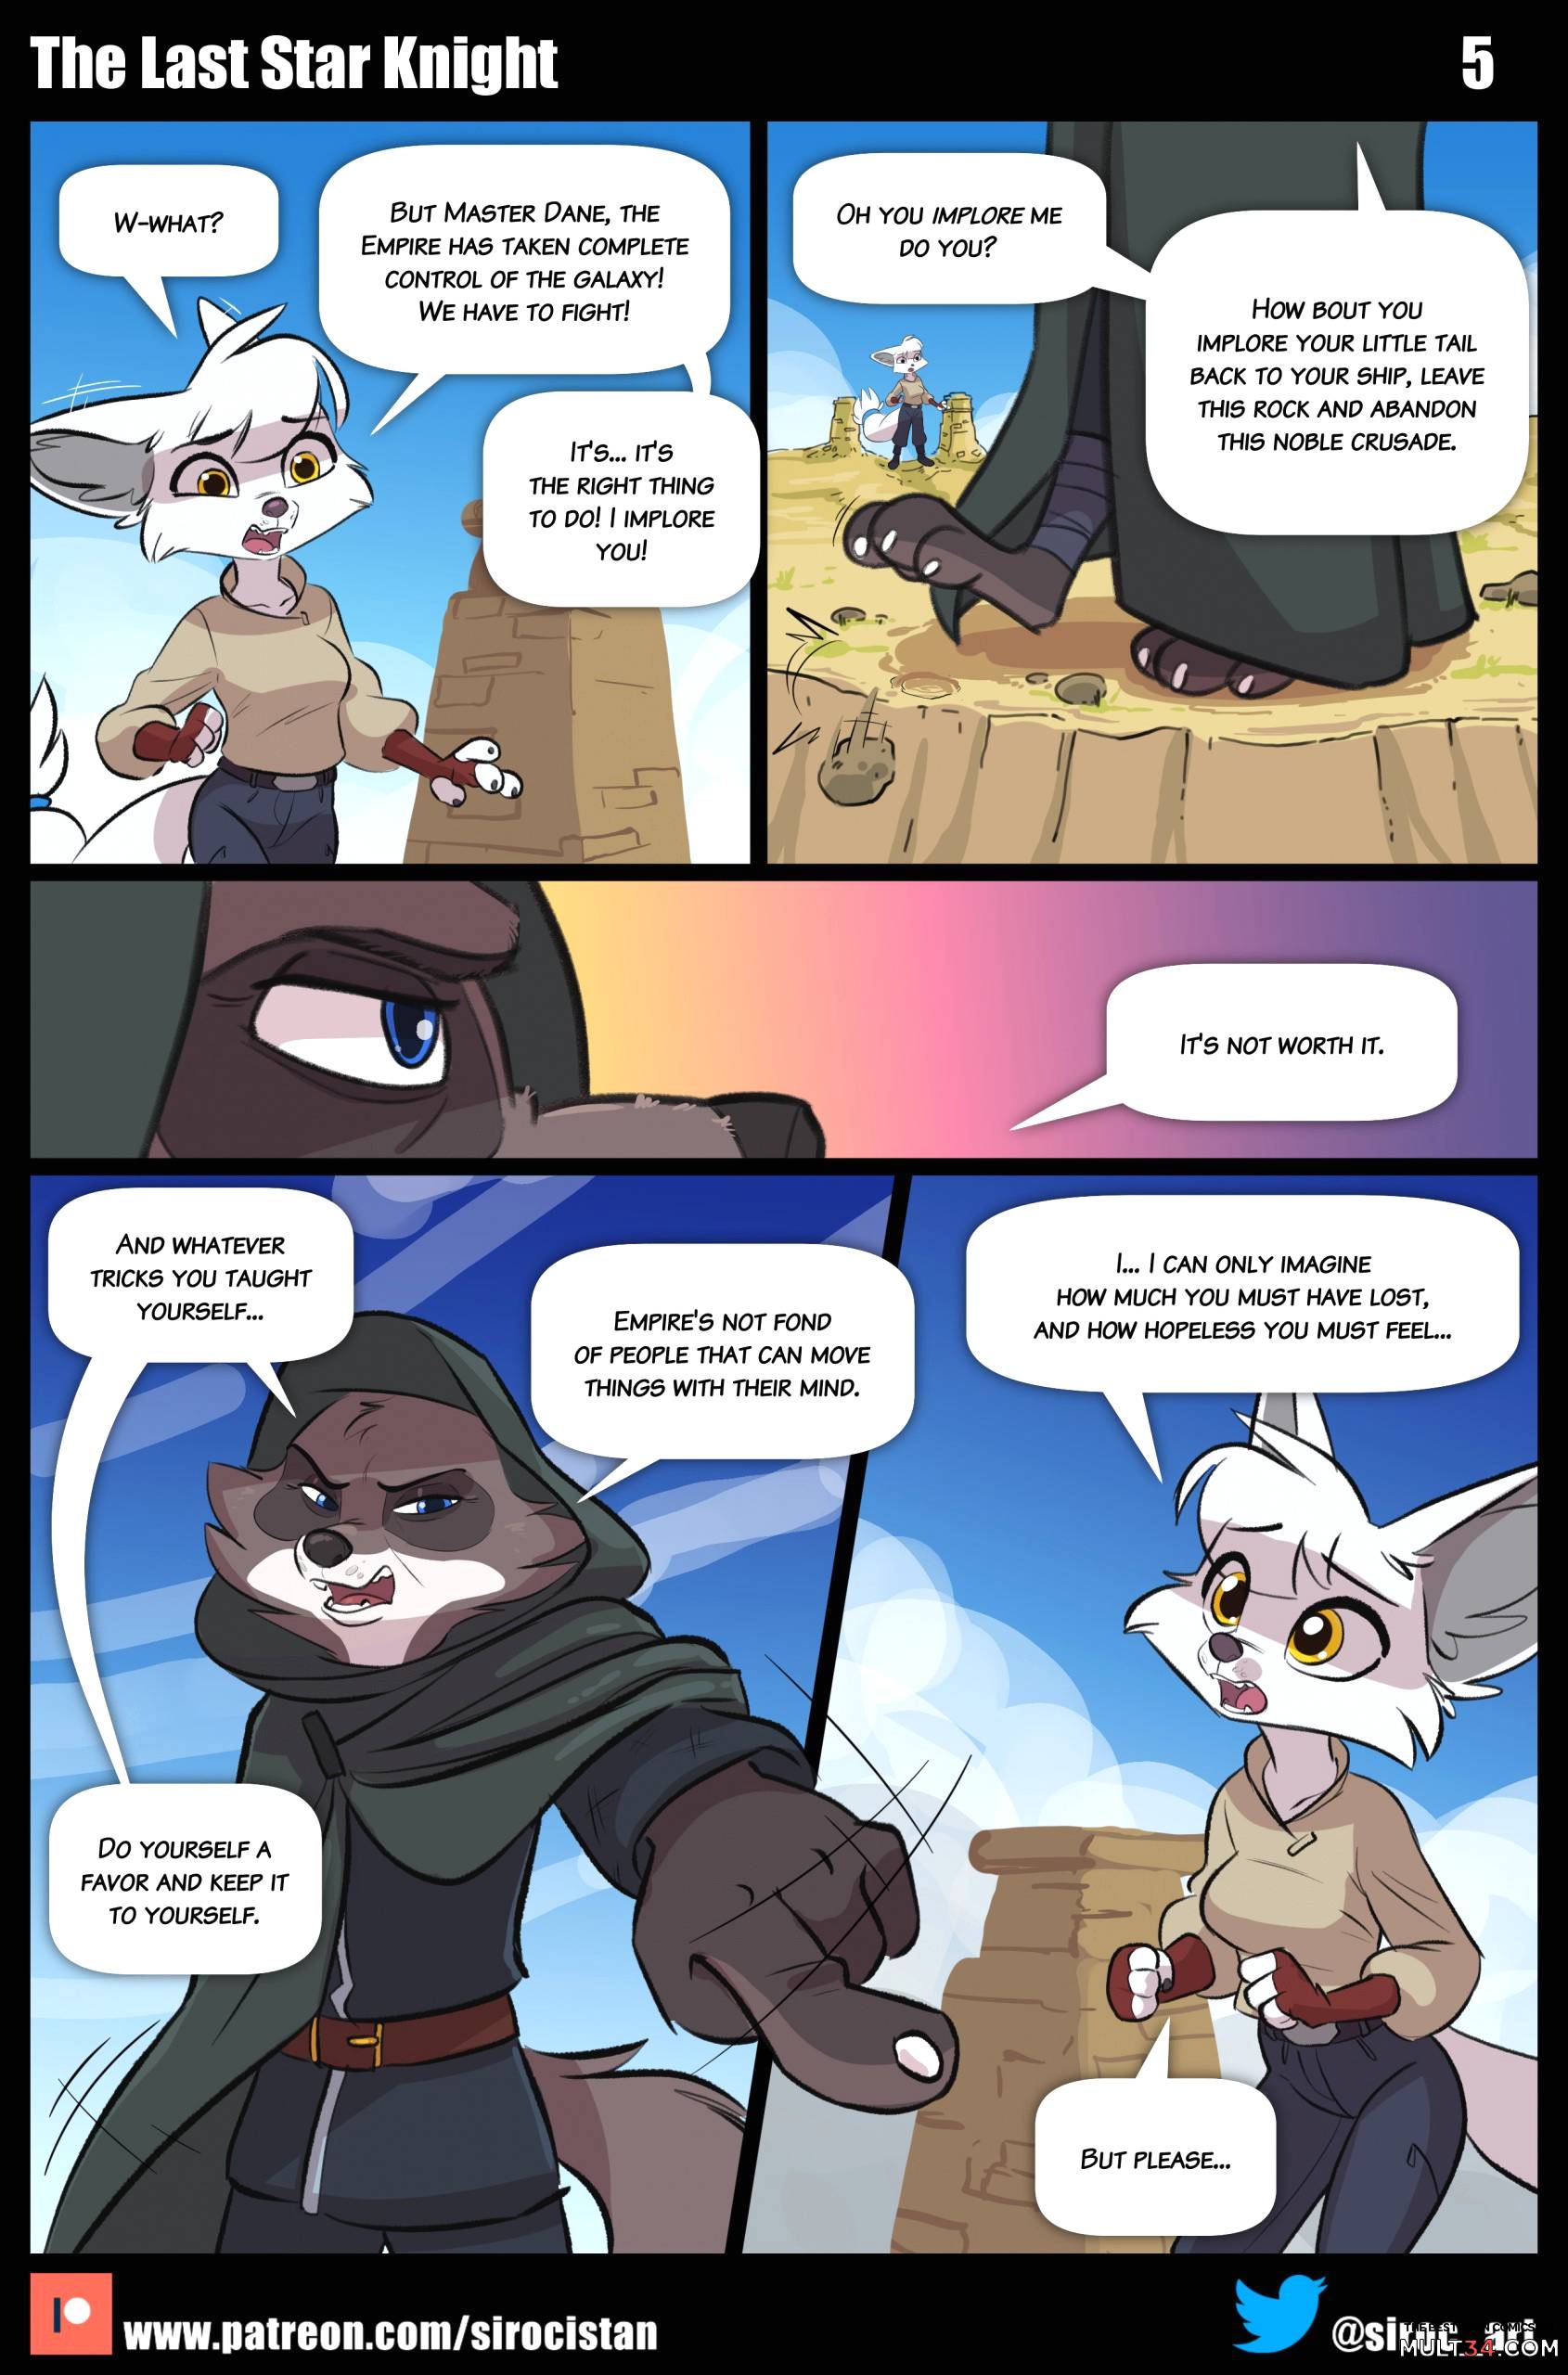 The Last Star Knight page 5